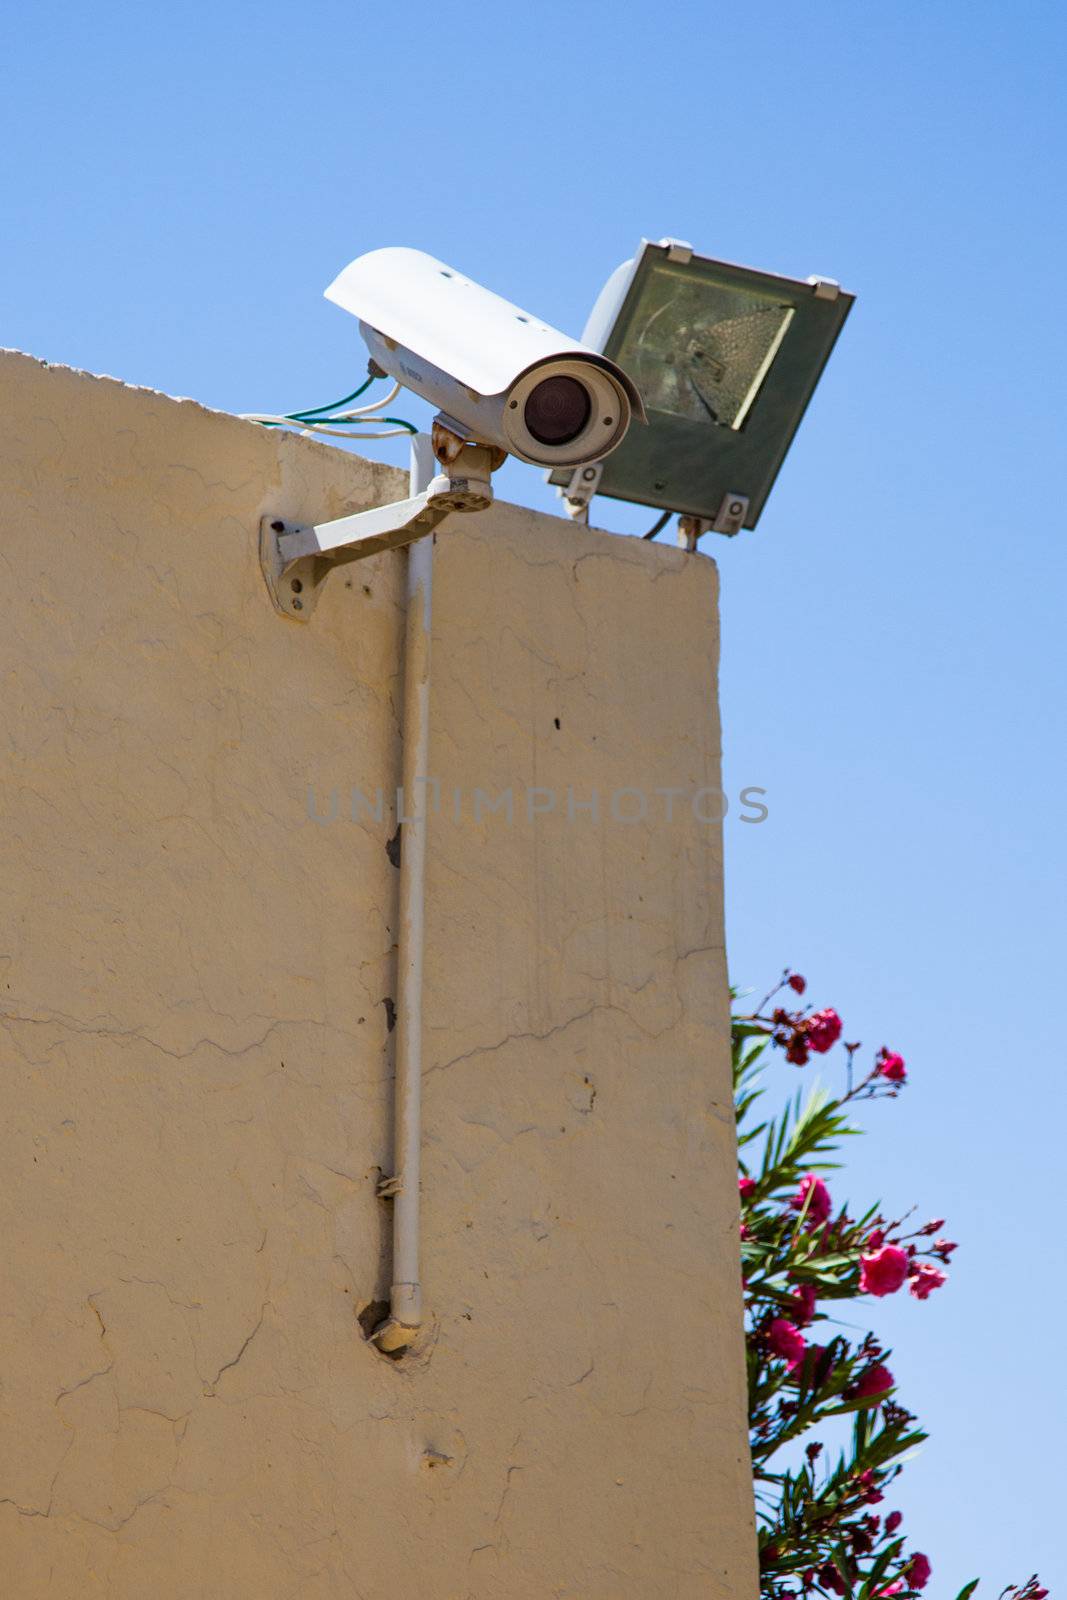 Video camera of system of supervision on a building wall with light